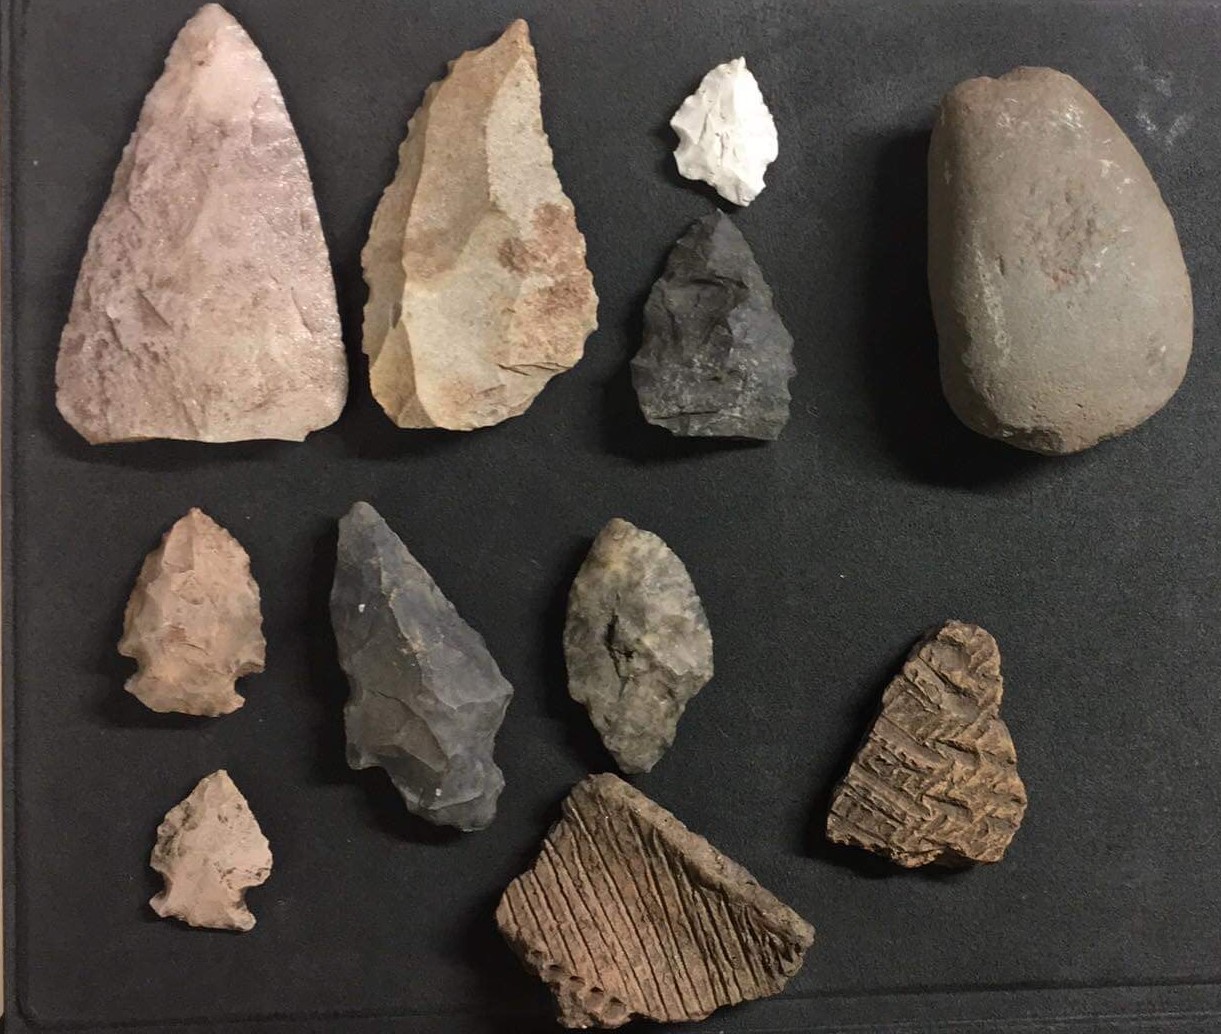 Artifacts collected in Oshkosh